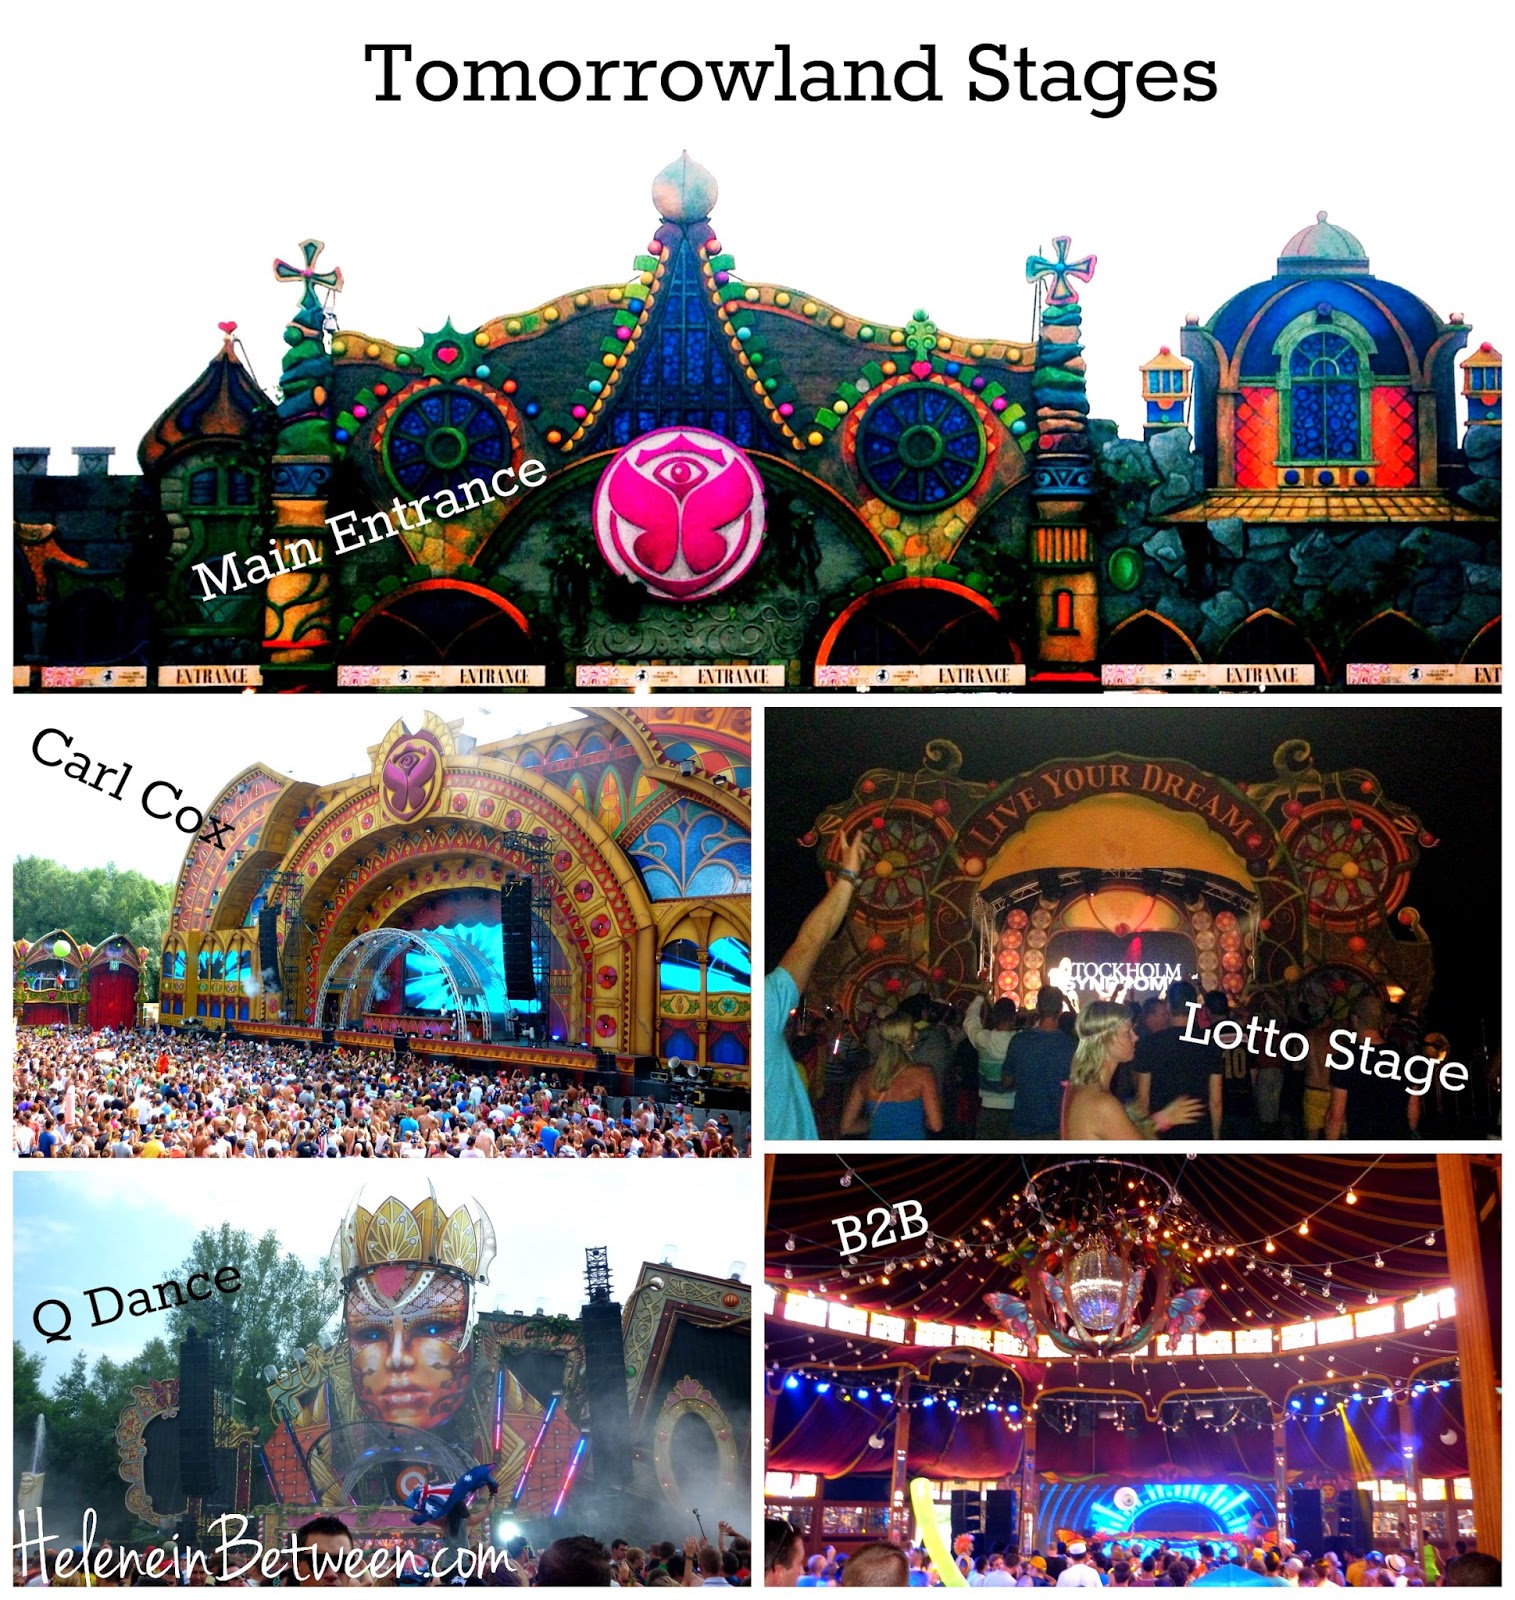 Tomorrowland 2014 stages